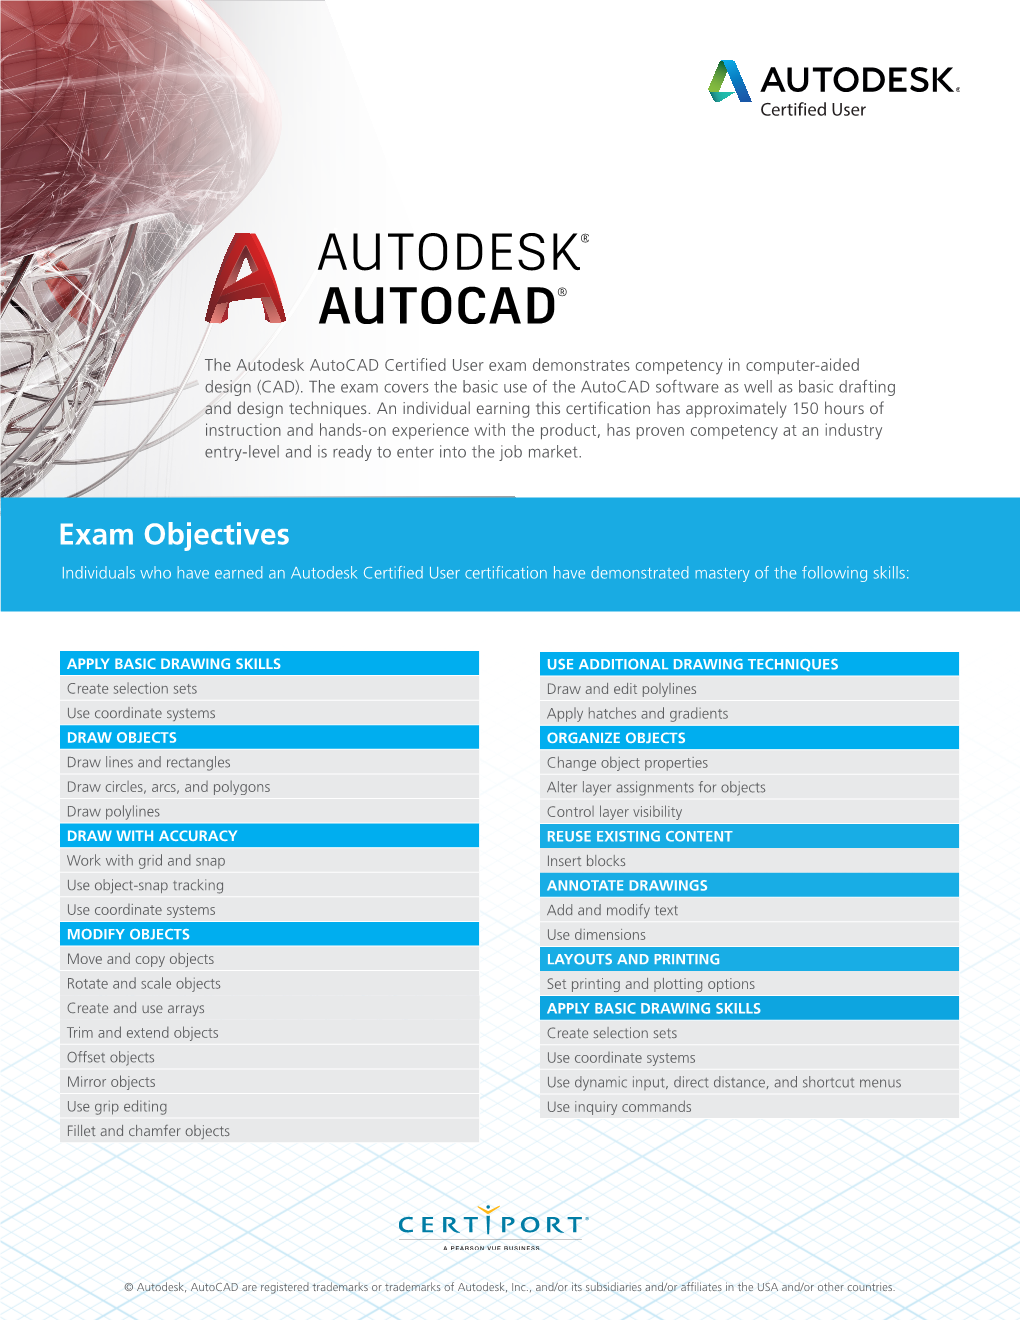 Autocad Certified User Exam Demonstrates Competency in Computer-Aided Design (CAD)